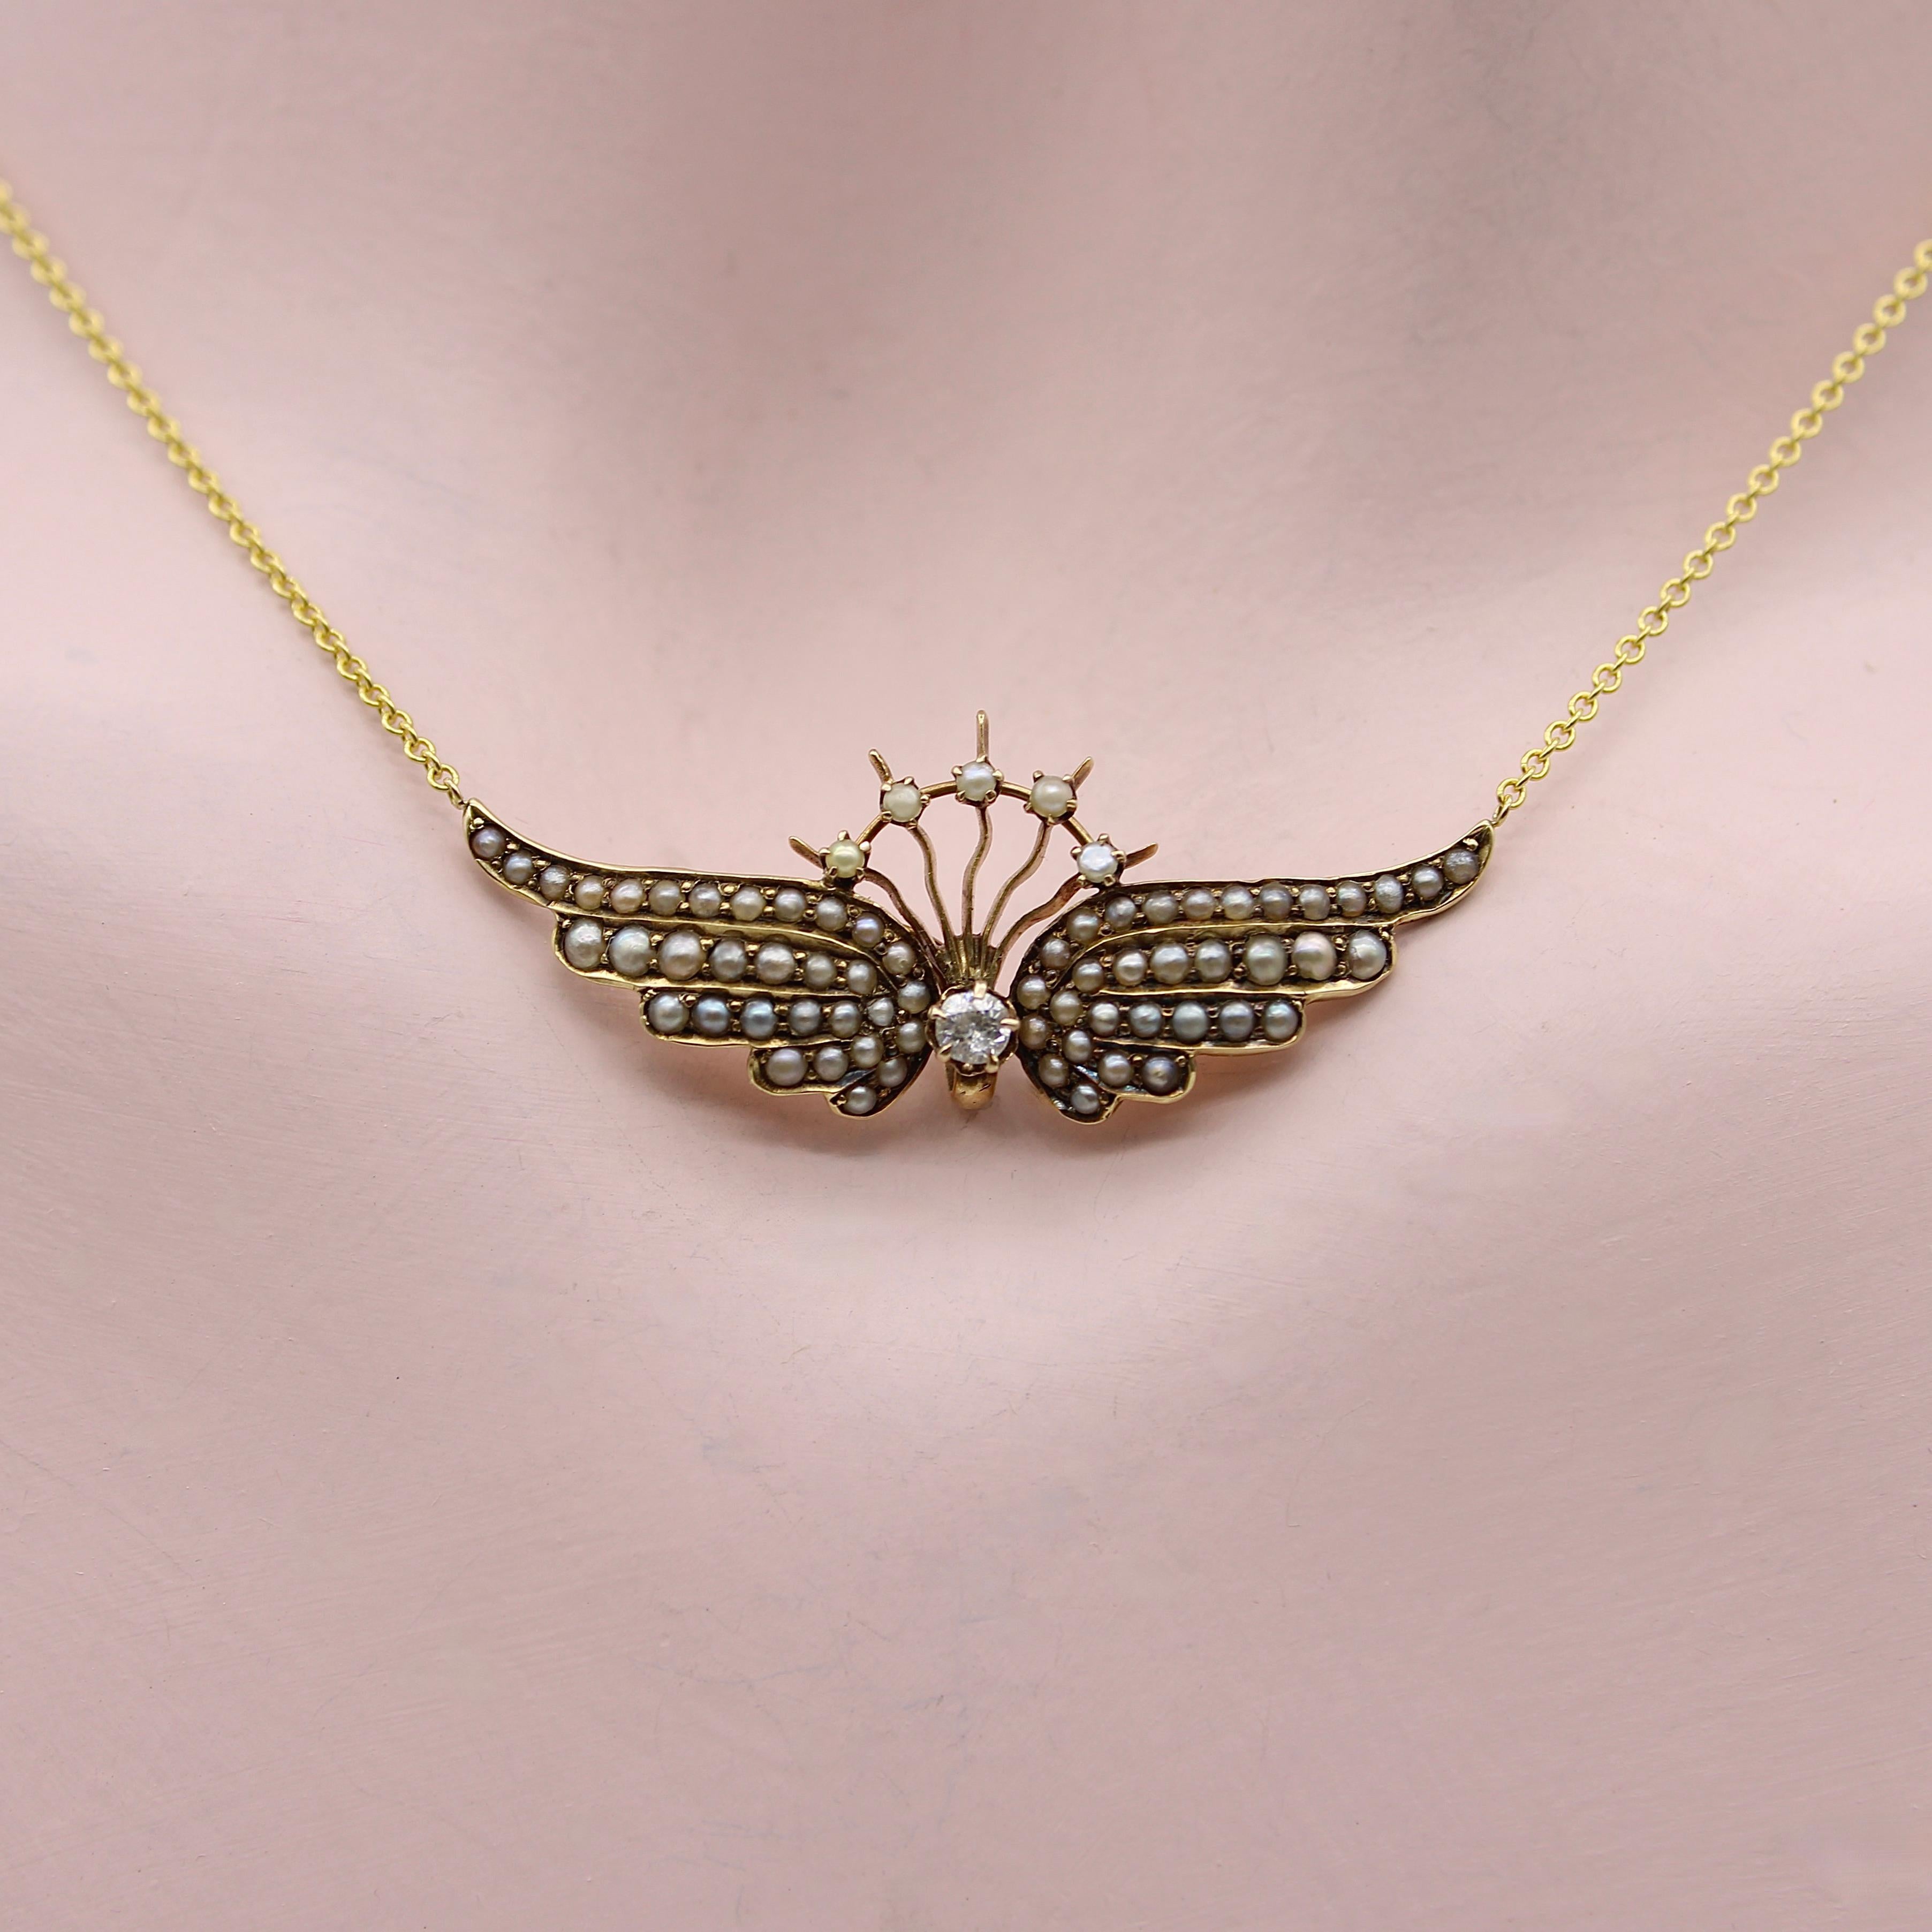 Old Mine Cut 14k Gold Victorian Angel Wing Necklace with Diamond and Seed Pearls For Sale